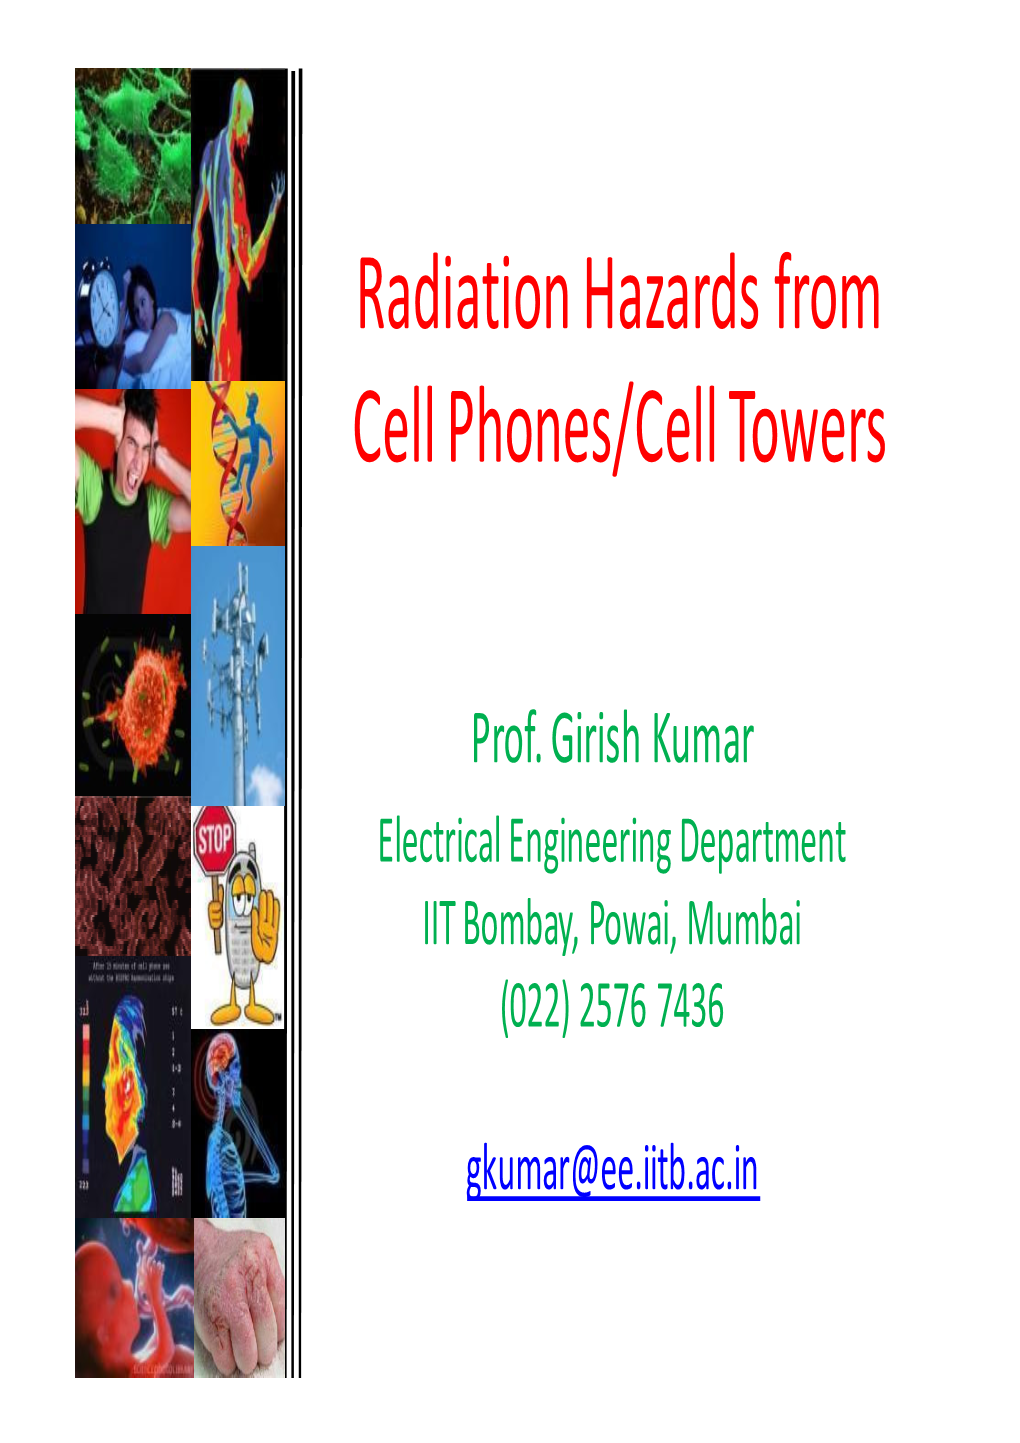 Radiation Hazards from Cell Phones/Cell Towers